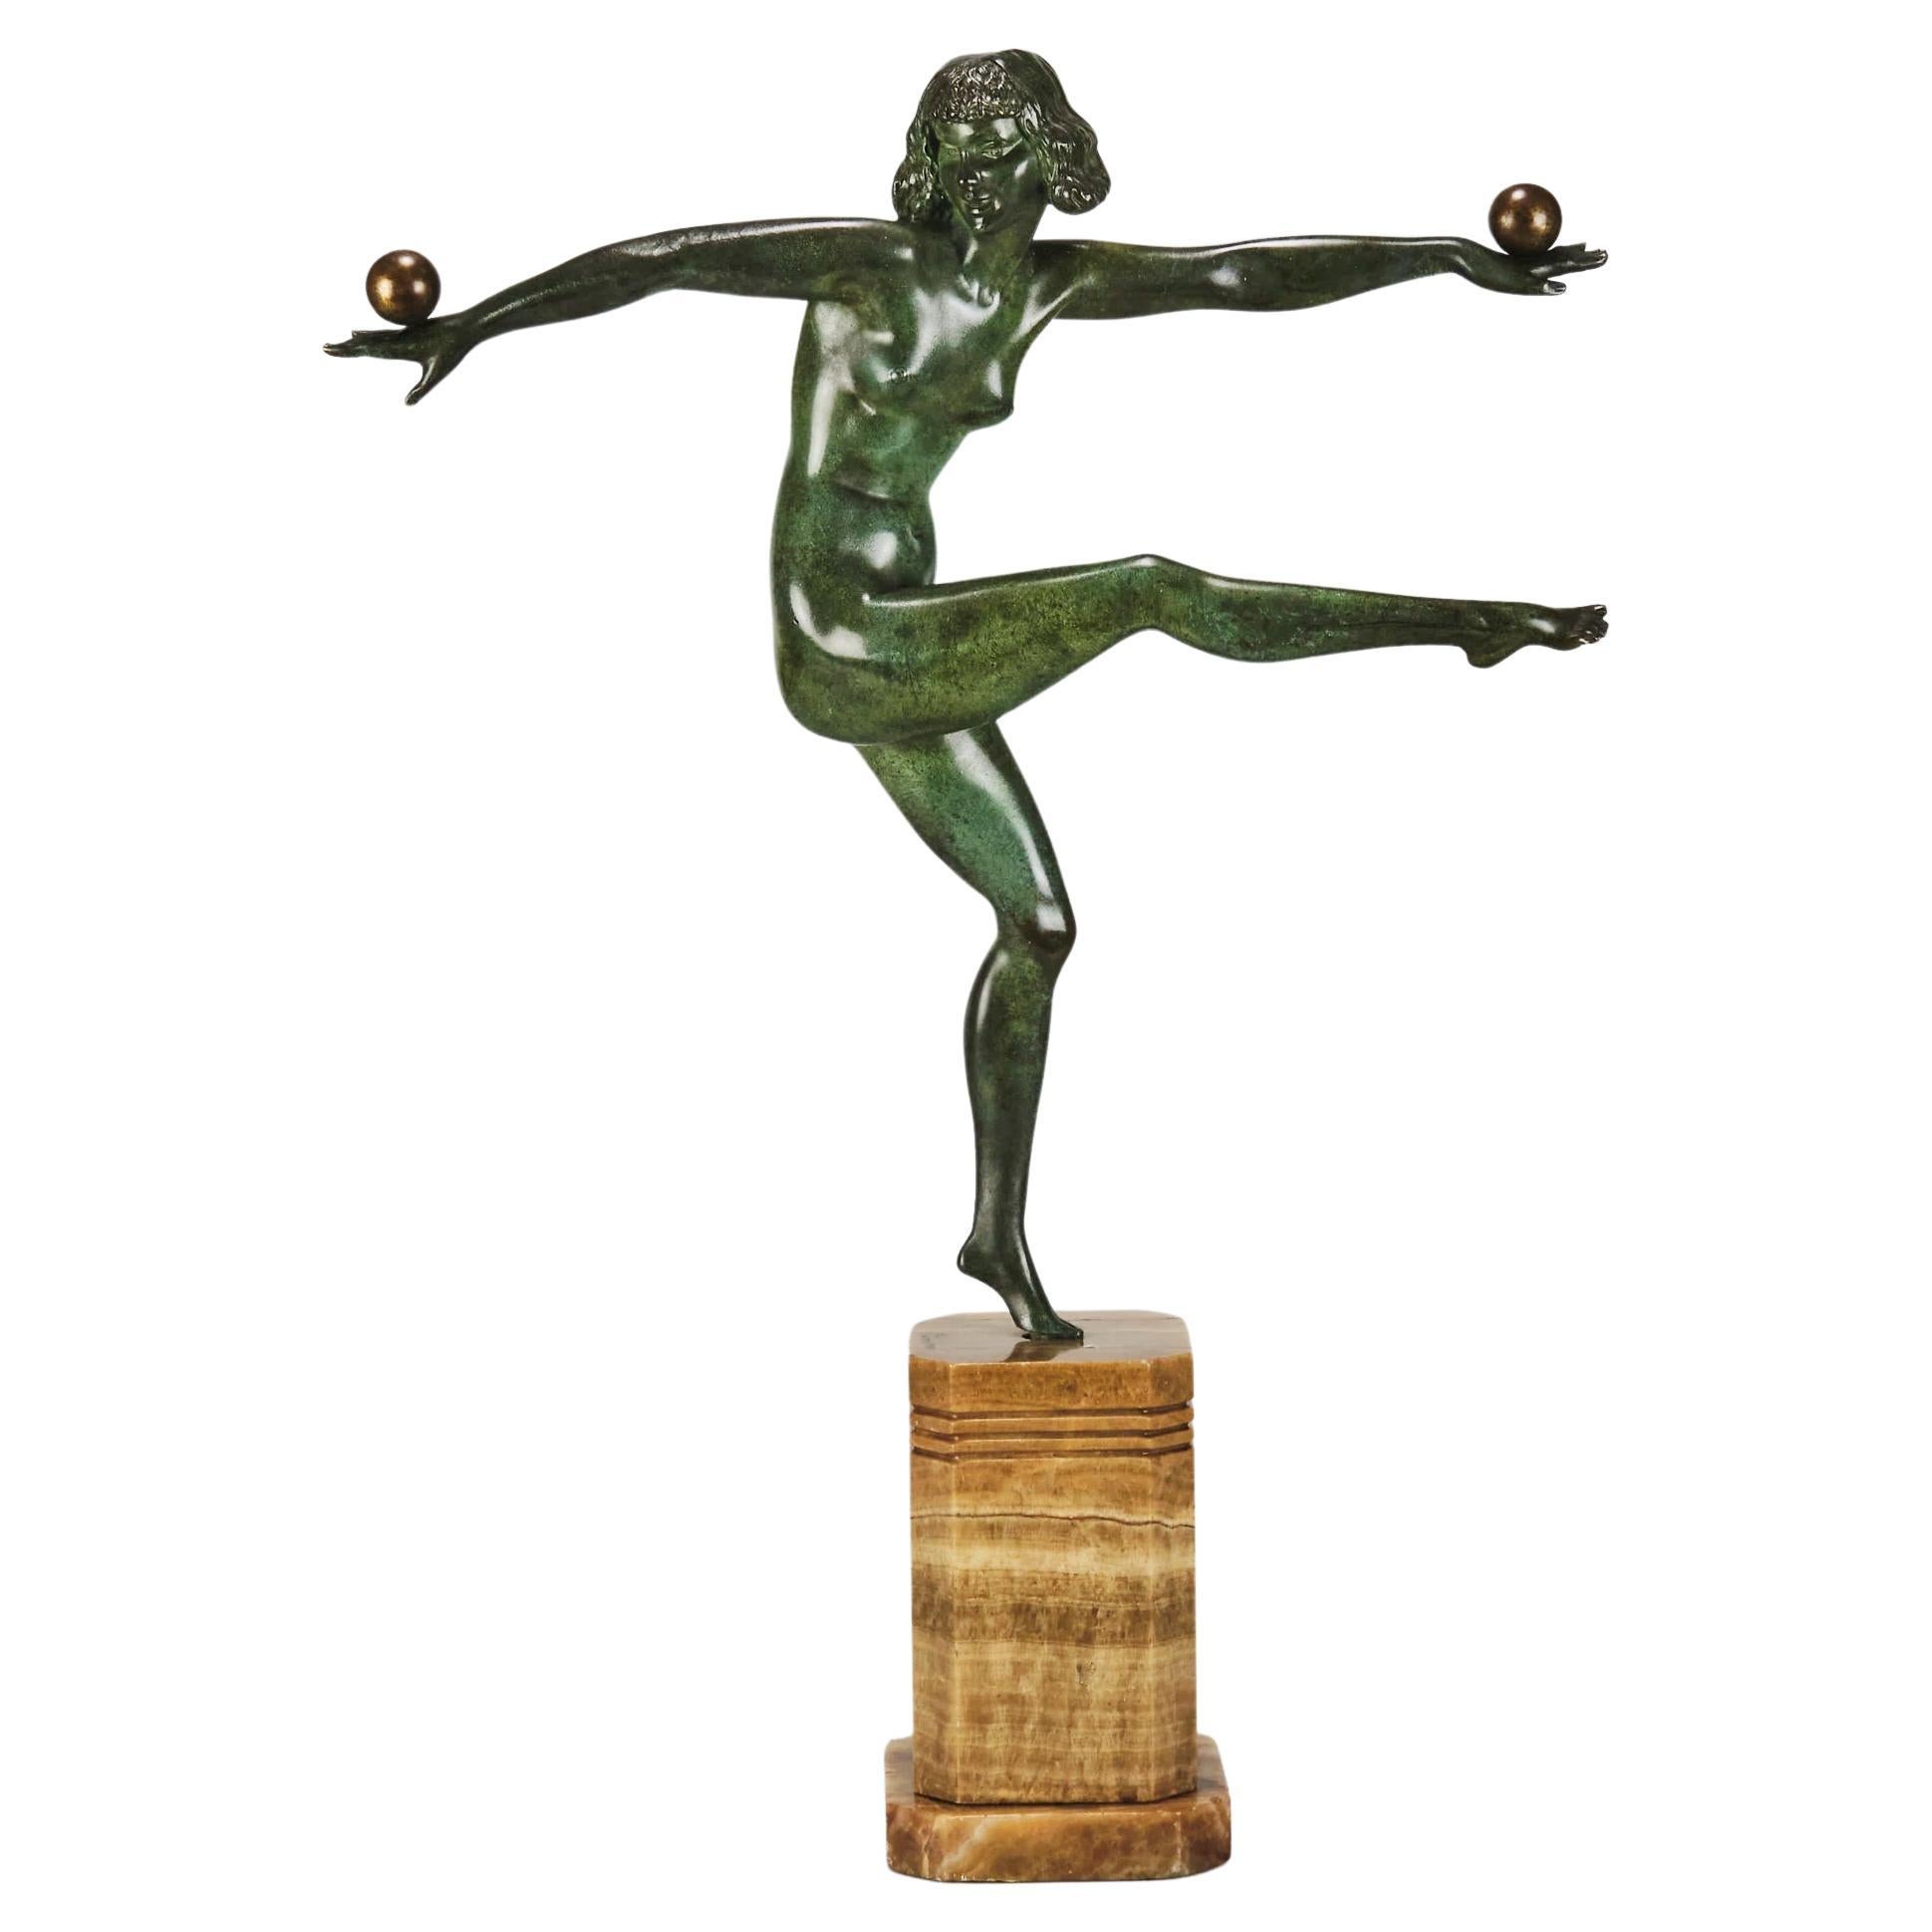 Art Deco Cold-Painted Bronze Sculpture entitled "Balancing" by Marcel  Bouraine For Sale at 1stDibs